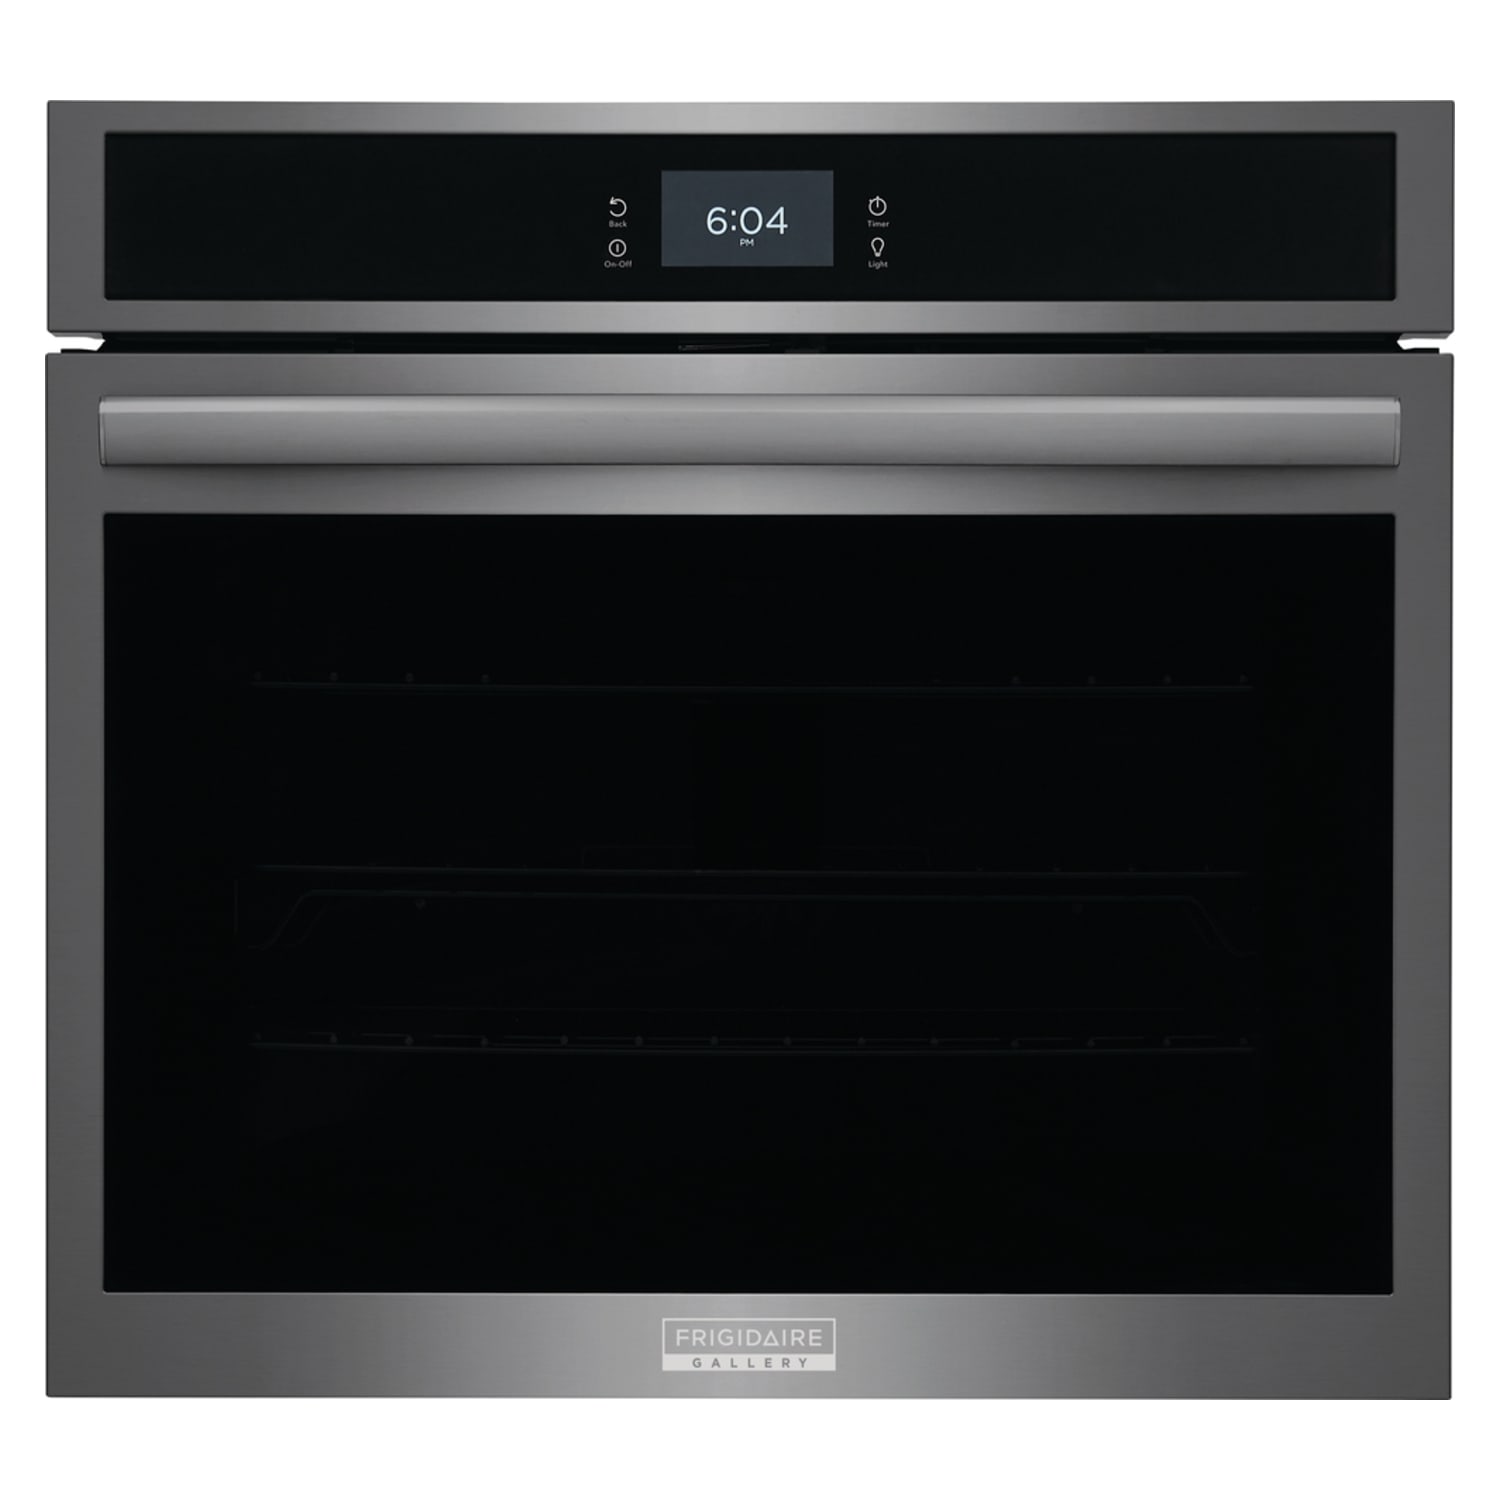 Frigidaire Gallery 30” Single Electric Wall Oven with Total Convection - Black Stainless Steel - GCWS3067AD